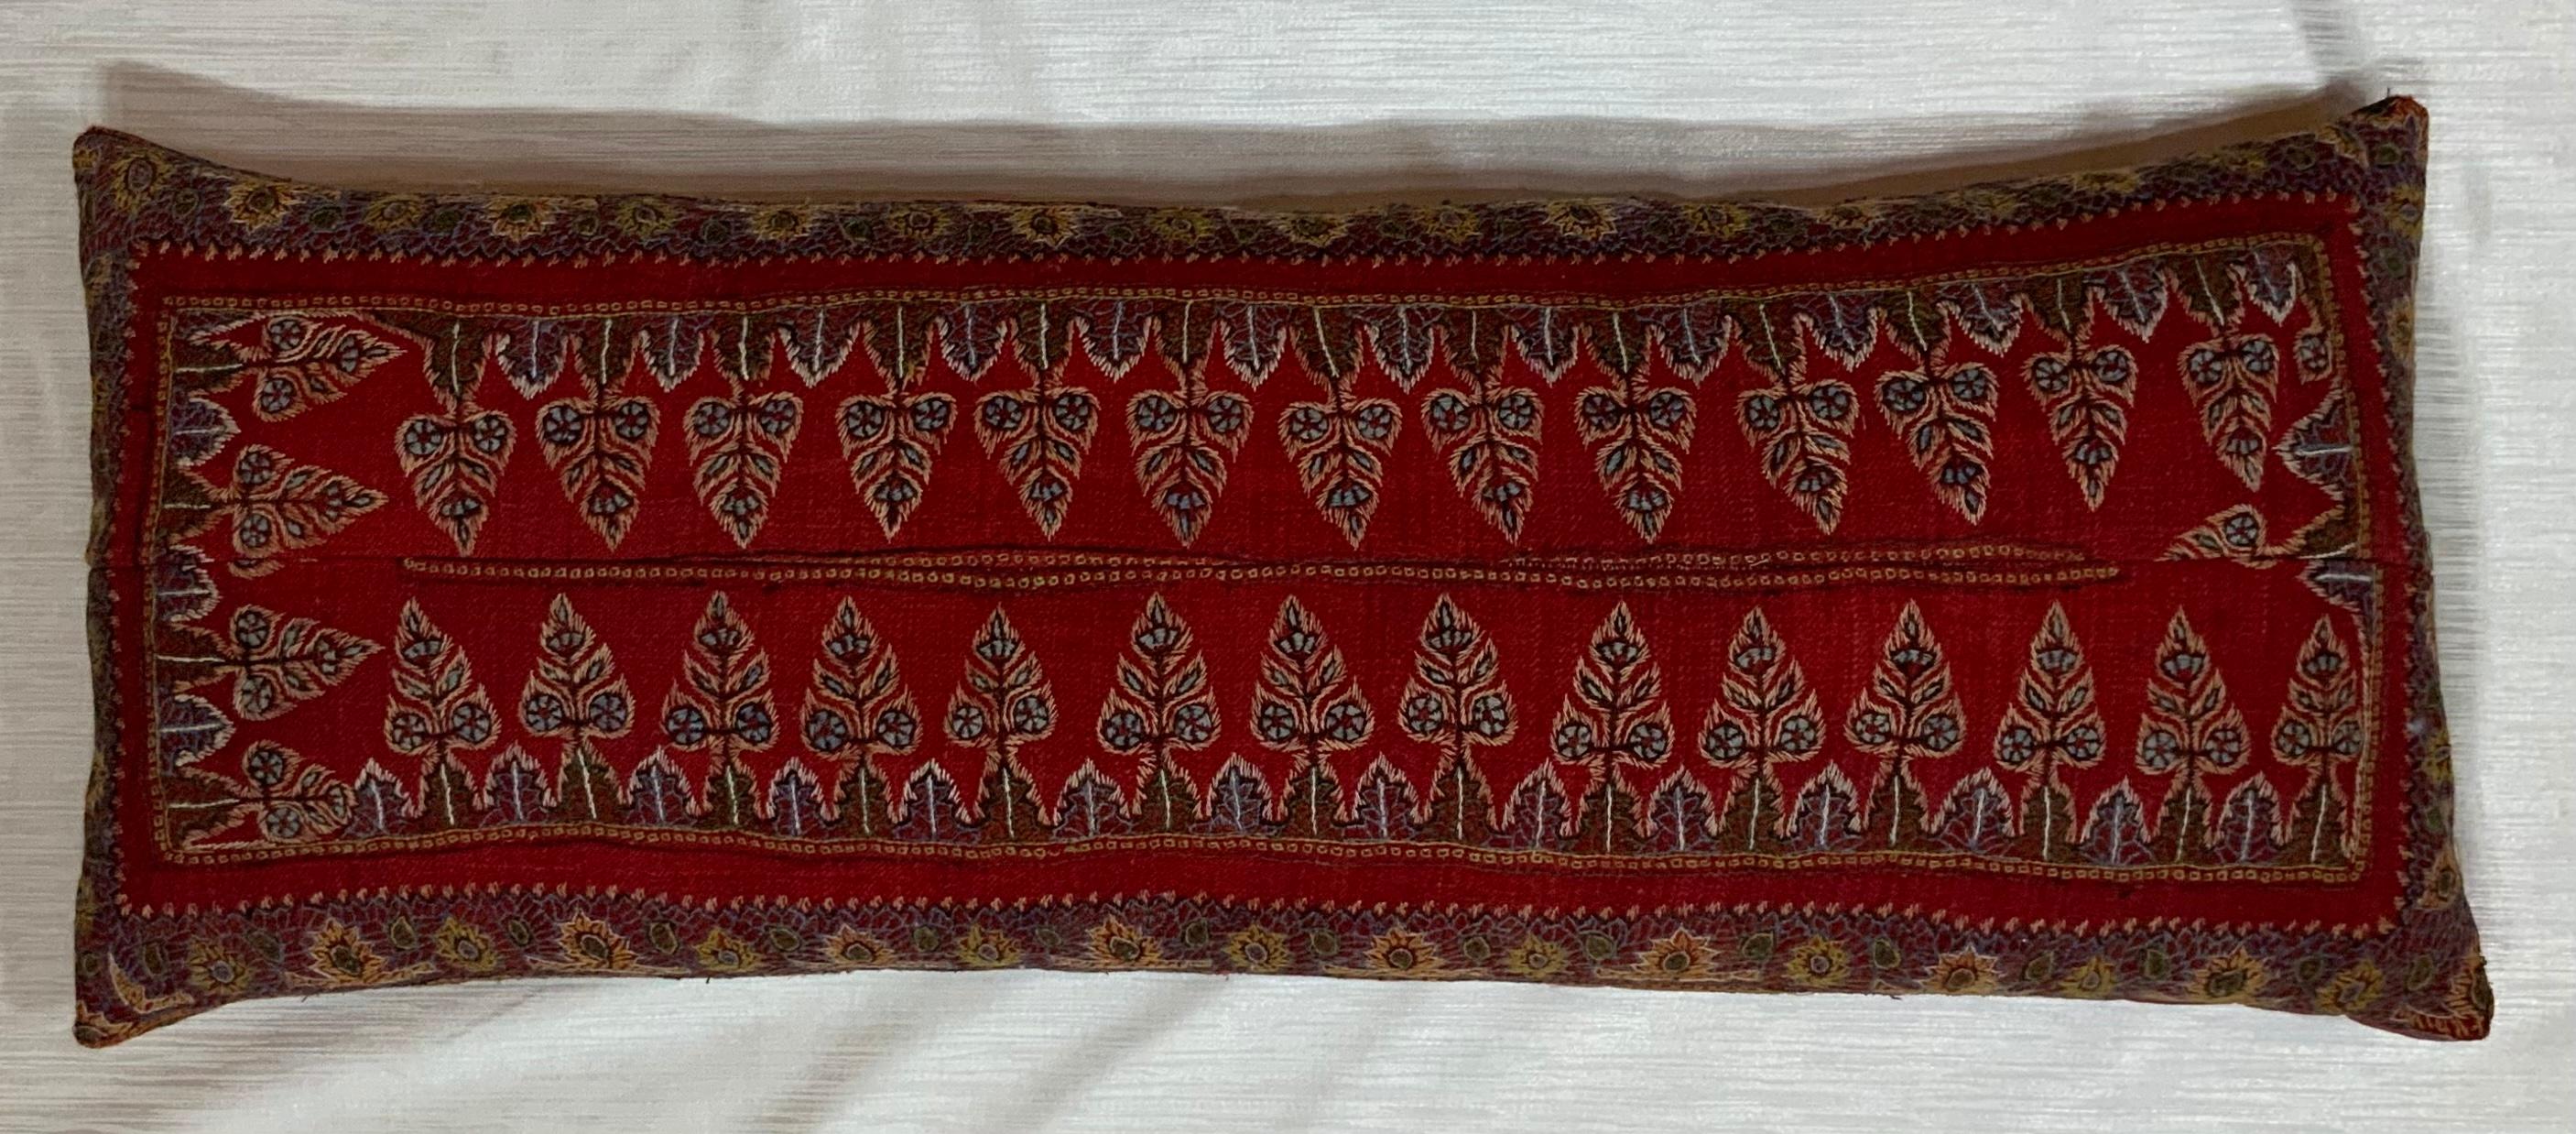 Single Hand Antique Embroidery Suzani Pillow 4